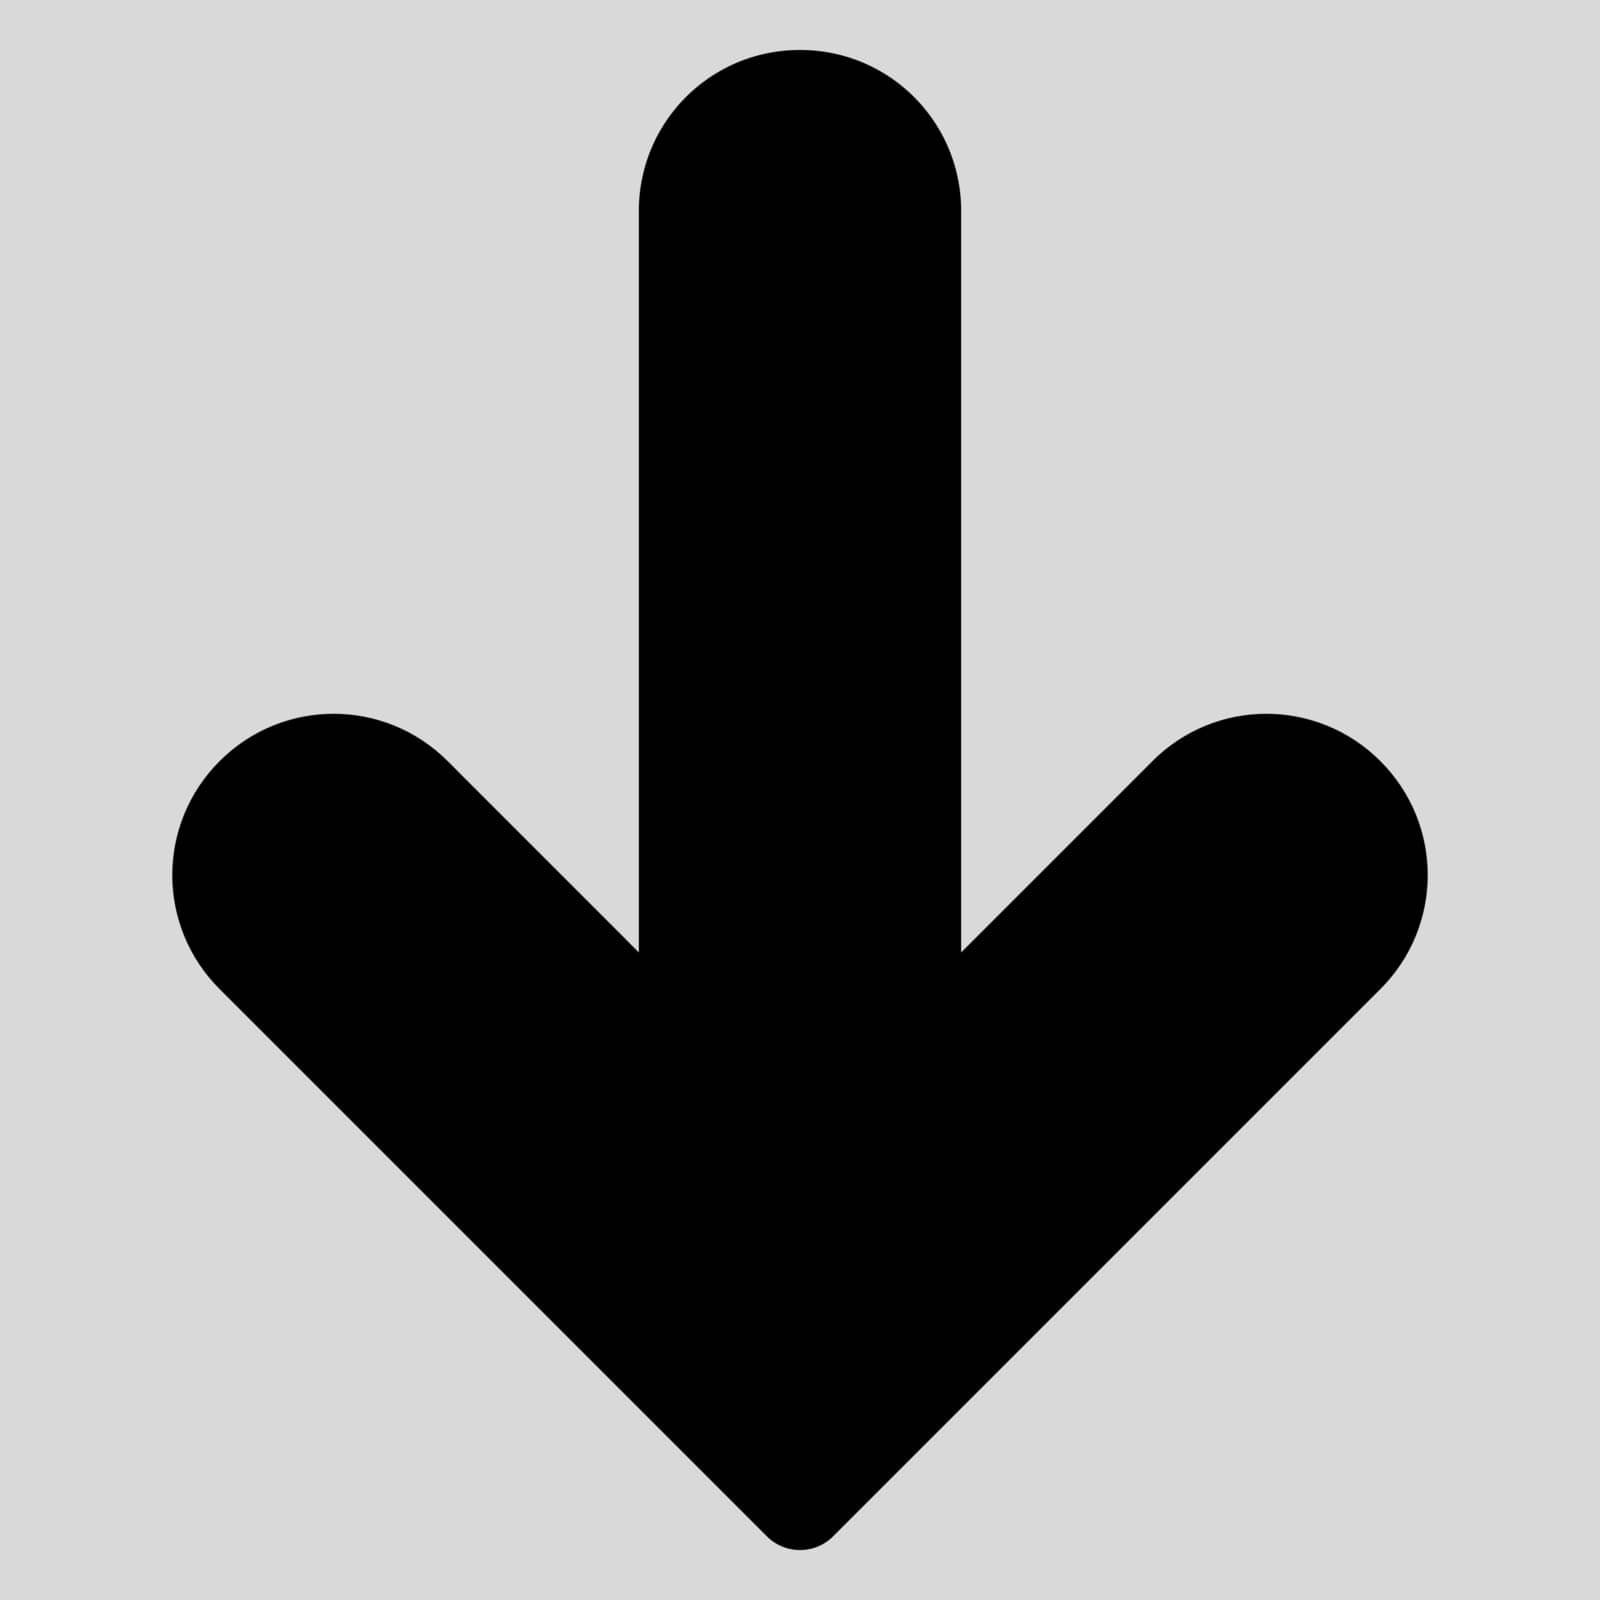 Arrow Down icon from Primitive Set. This isolated flat symbol is drawn with black color on a light gray background, angles are rounded.